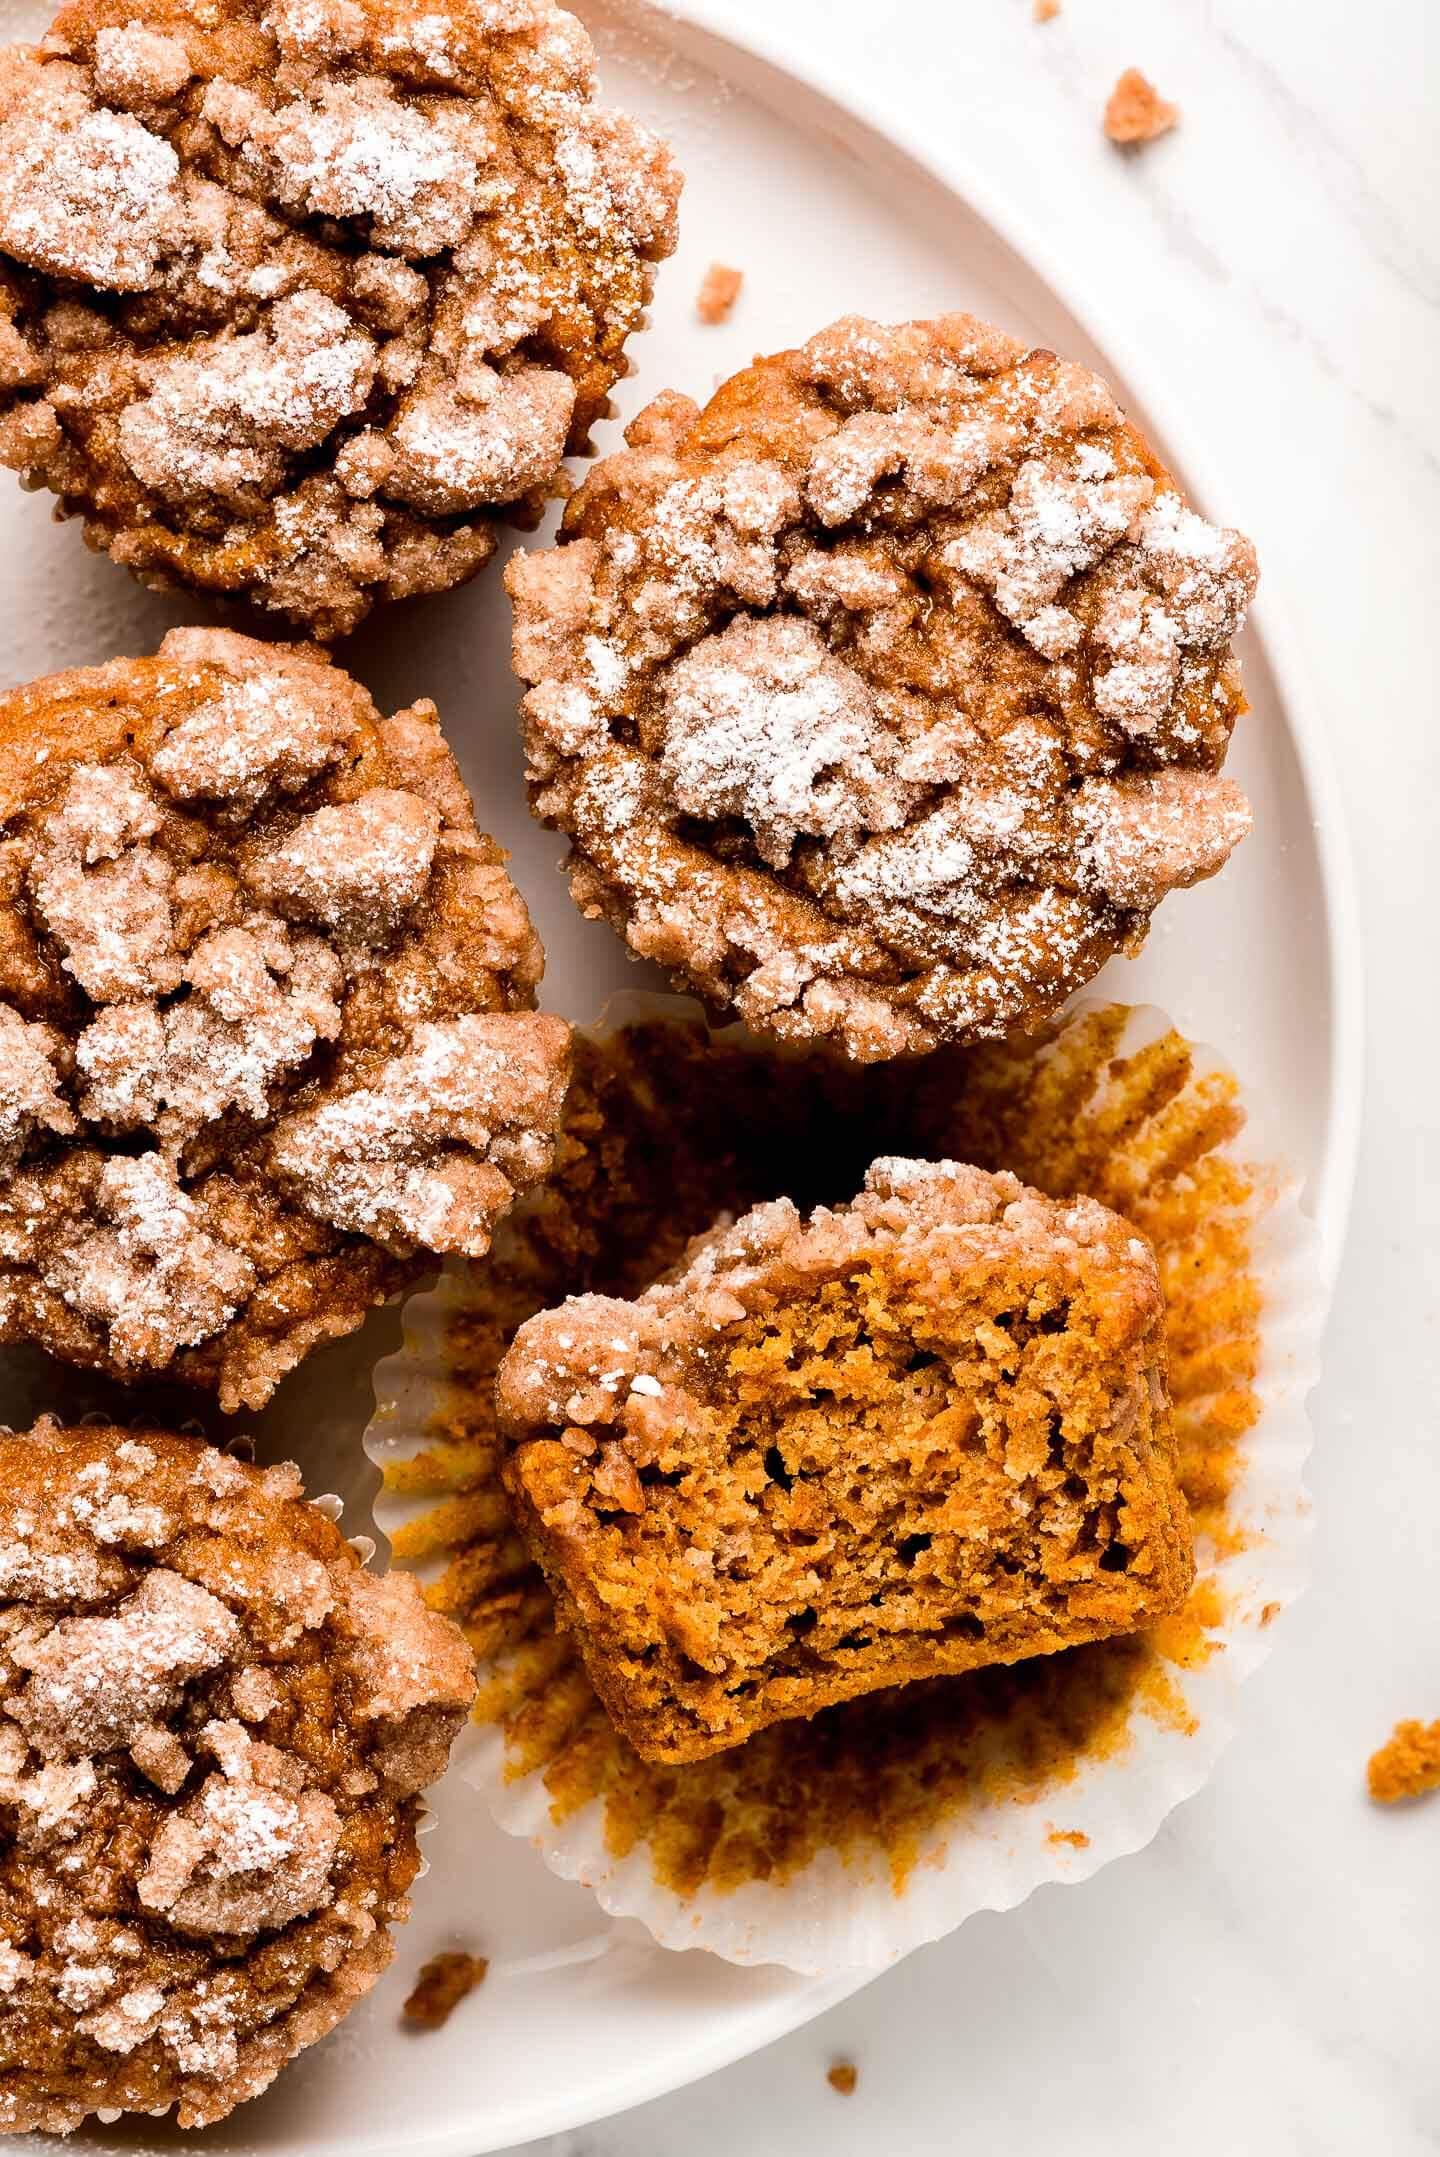 Pumpkin Streusel Muffins on a plate with one cut in half to show inside.